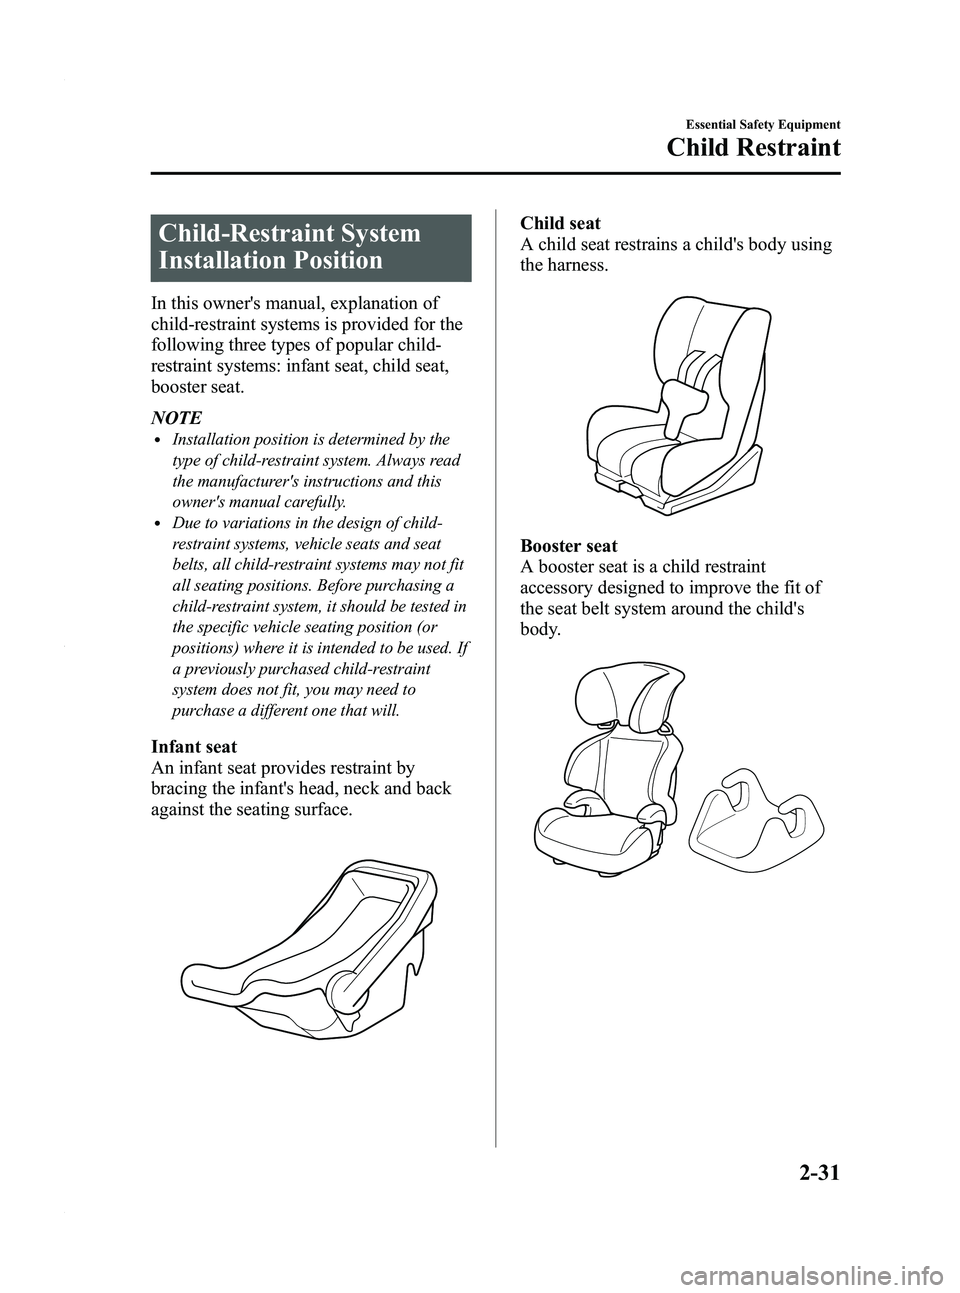 MAZDA MODEL 3 5-DOOR 2012 Service Manual Black plate (45,1)
Child-Restraint System
Installation Position
In this owners manual, explanation of
child-restraint systems is provided for the
following three types of popular child-
restraint sys